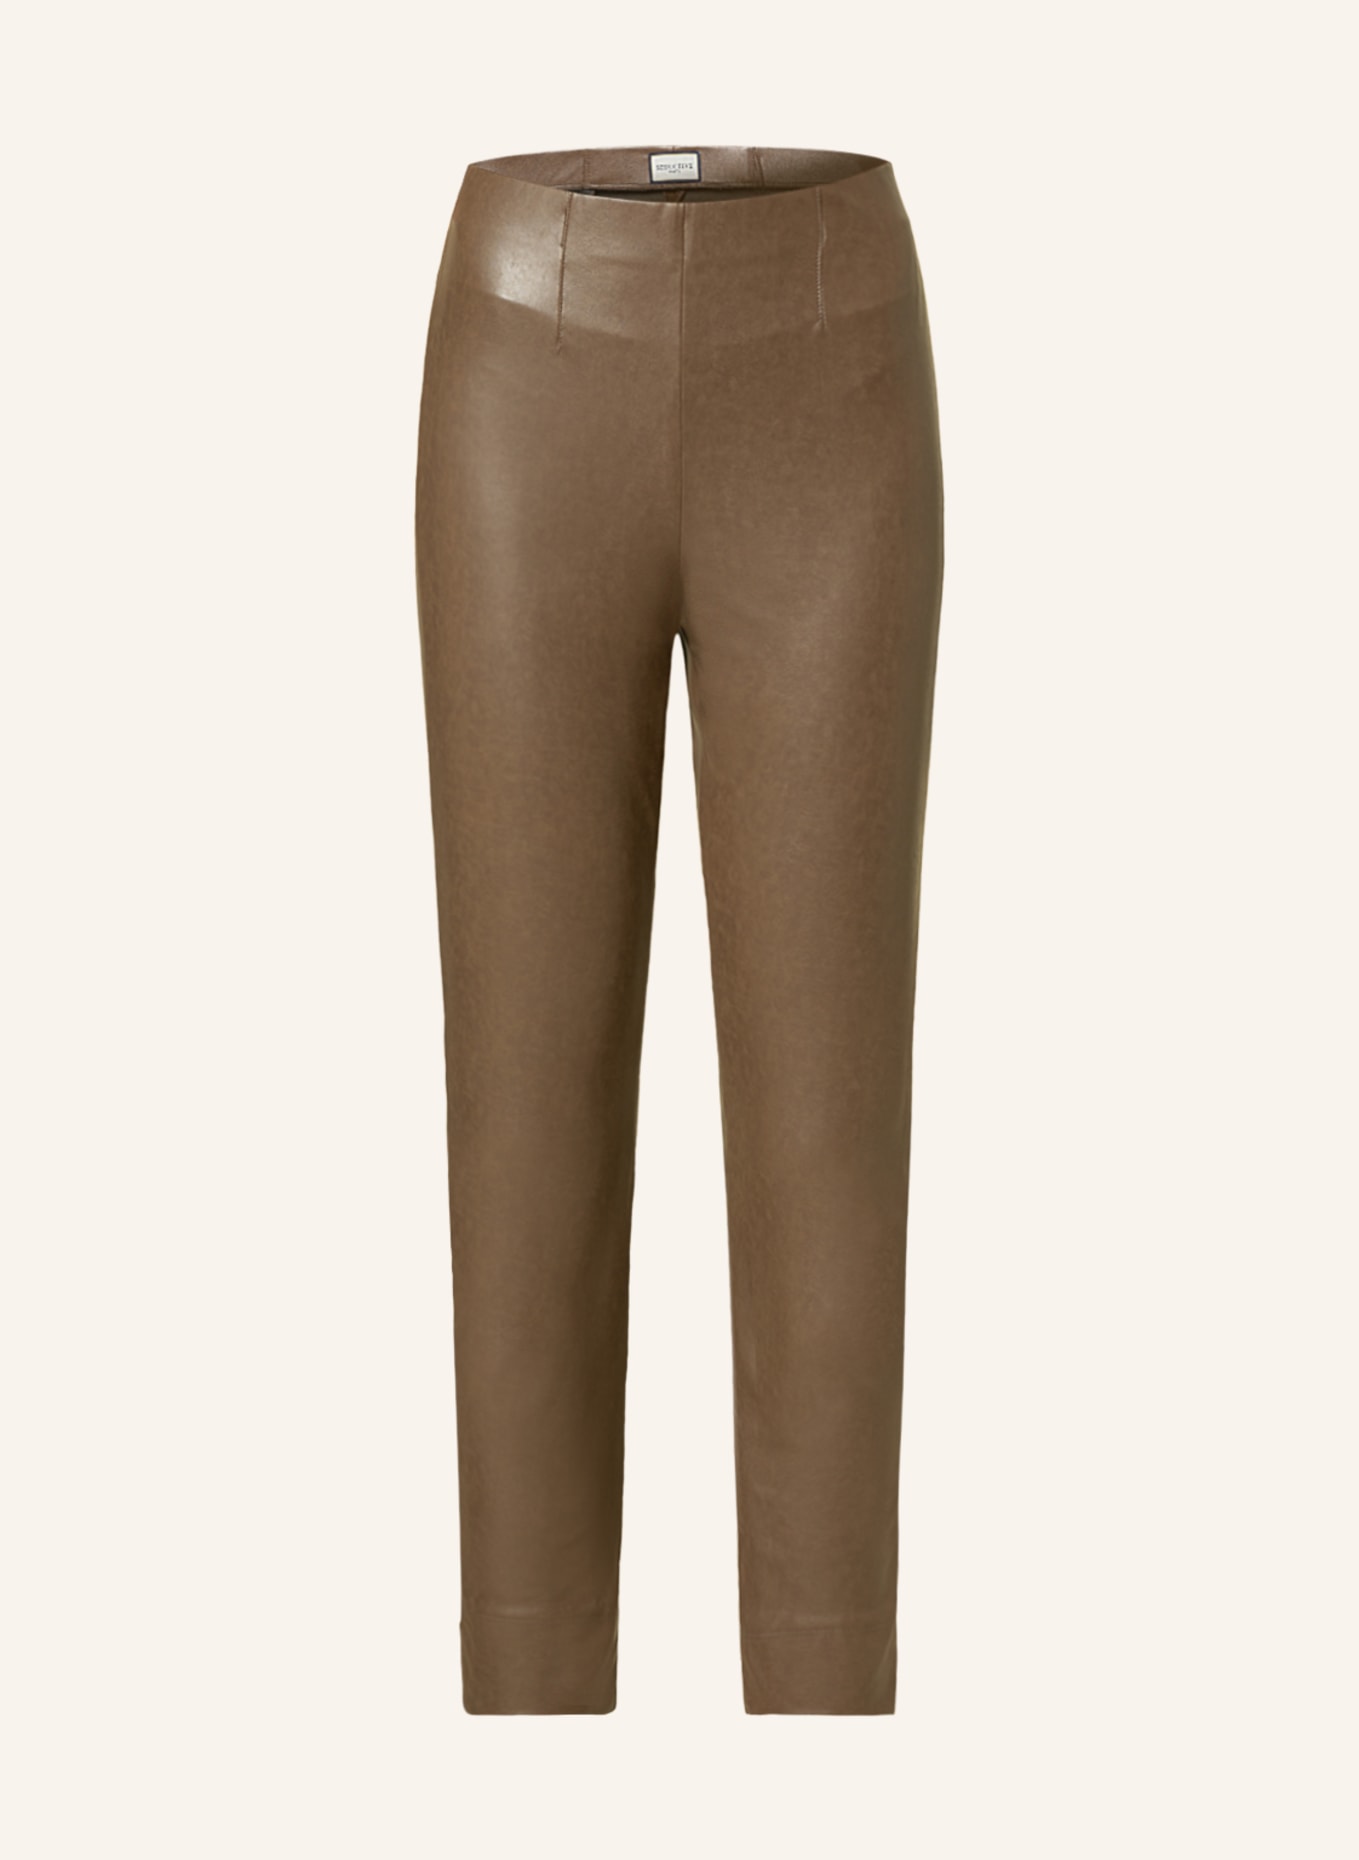 SEDUCTIVE 7/8 pants SABRINA in leather look, Color: BROWN (Image 1)